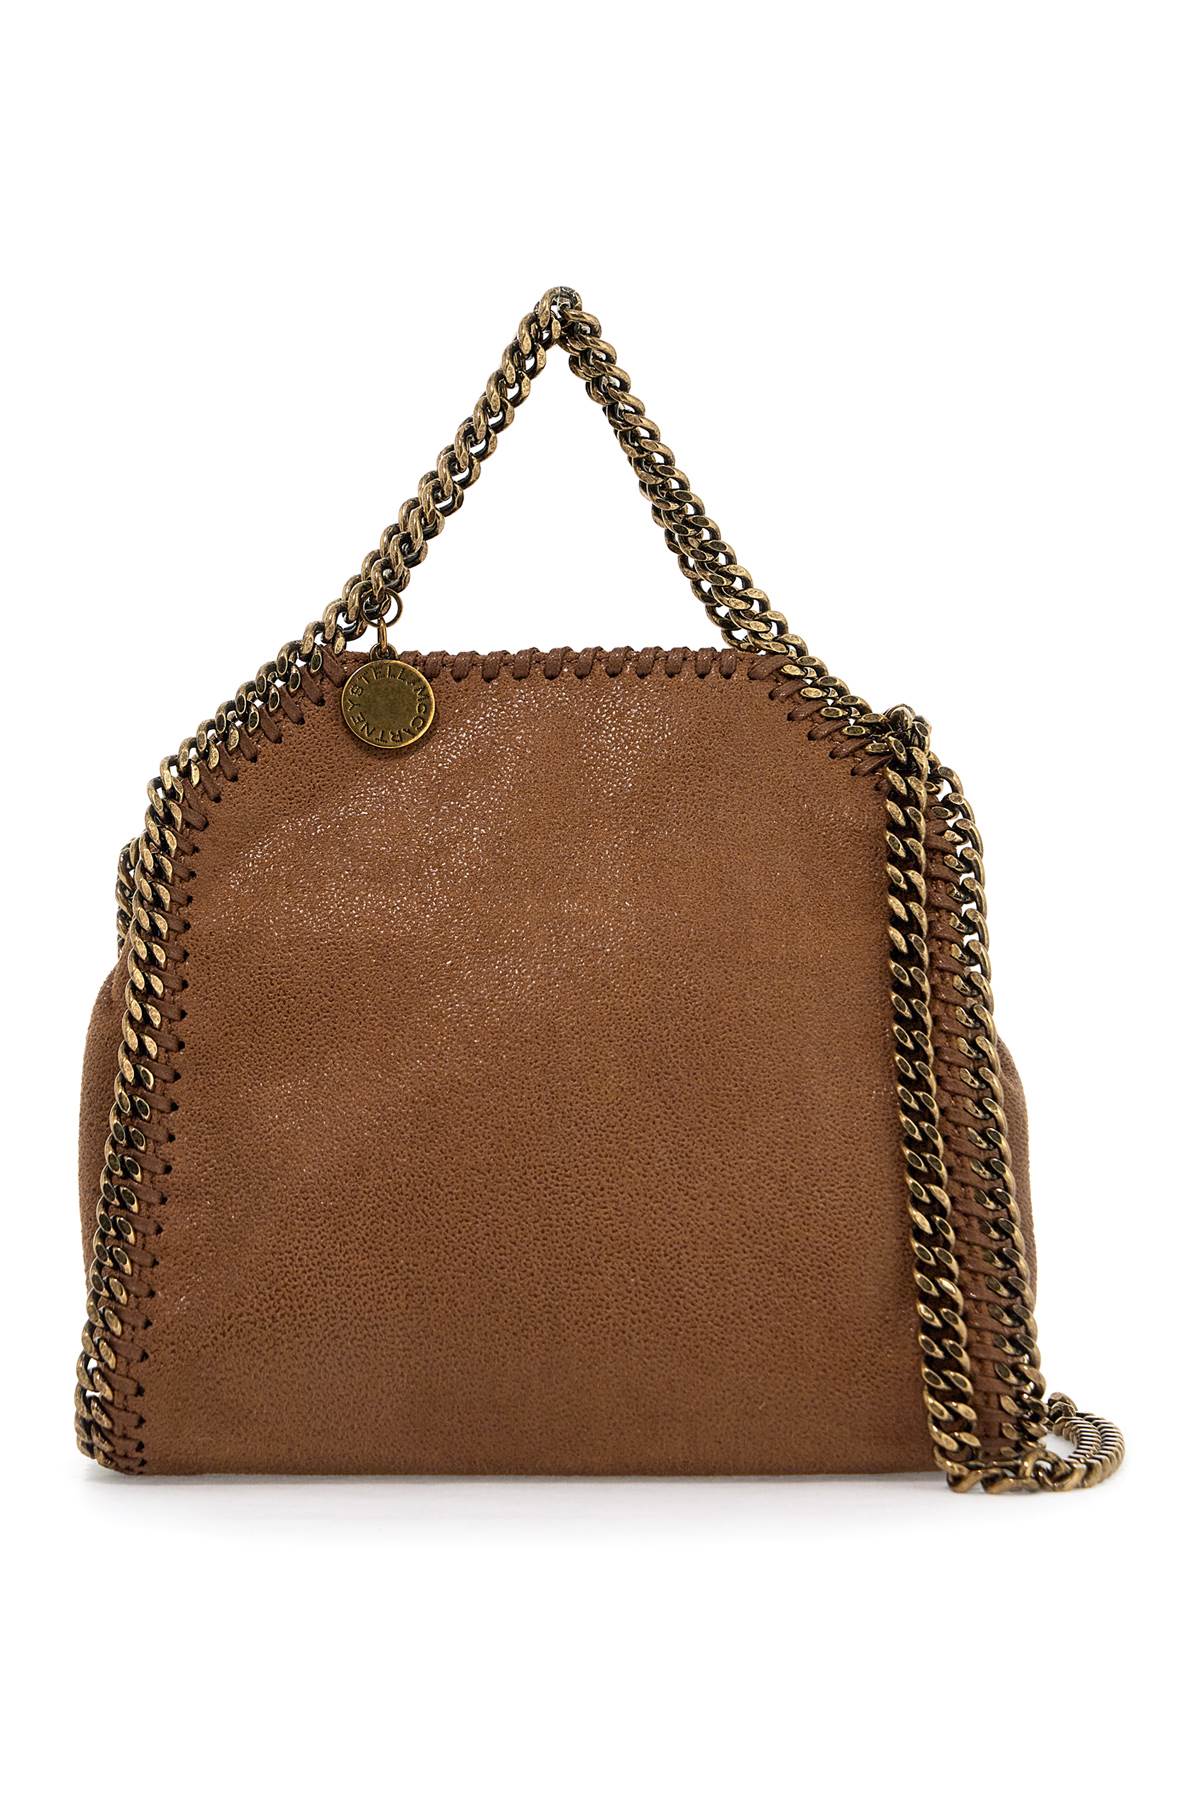 STELLA MCCARTNEY Faux Leather Tiny Falabella Handbag for Women - FW24 Collection